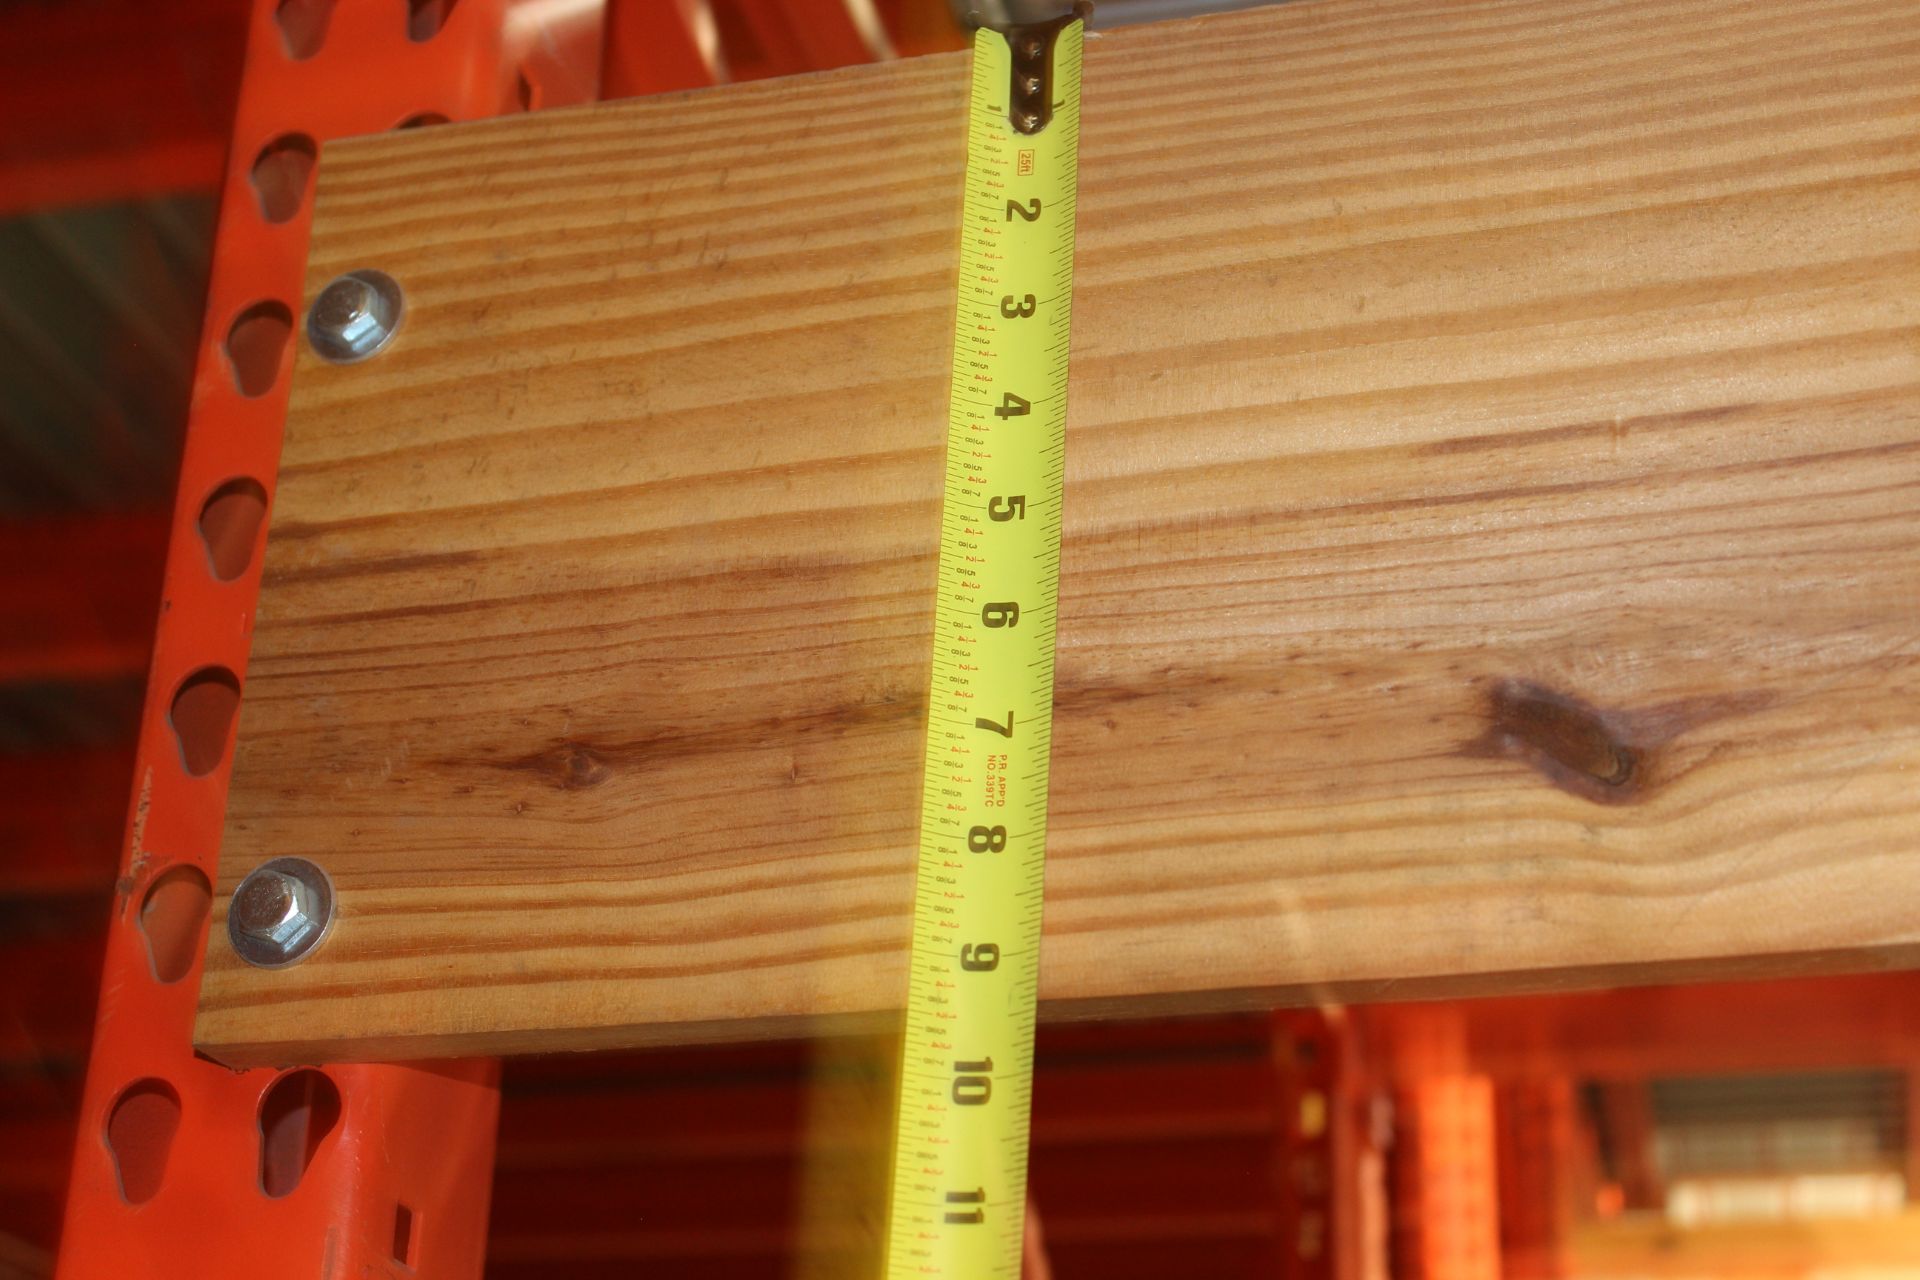 WOODEN PALLET STOPPER / BACK STOP. SIZE: 123"L X 9.5"W X 3/4"THICK. 2 PALLETS, 2 TIMES MONEY - Image 5 of 5